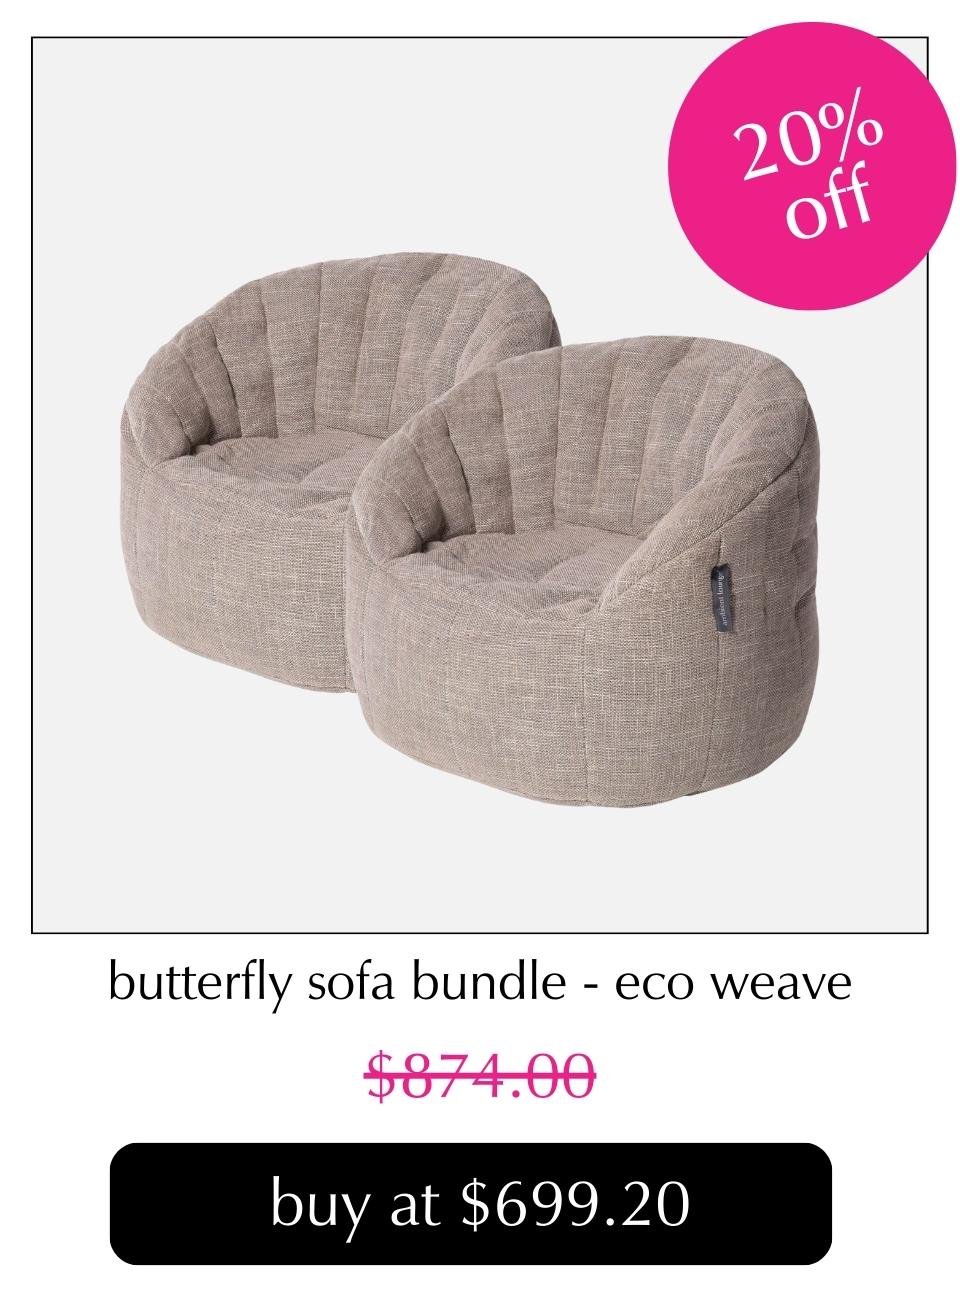 butterfly sofa eco weave bundle 20% off